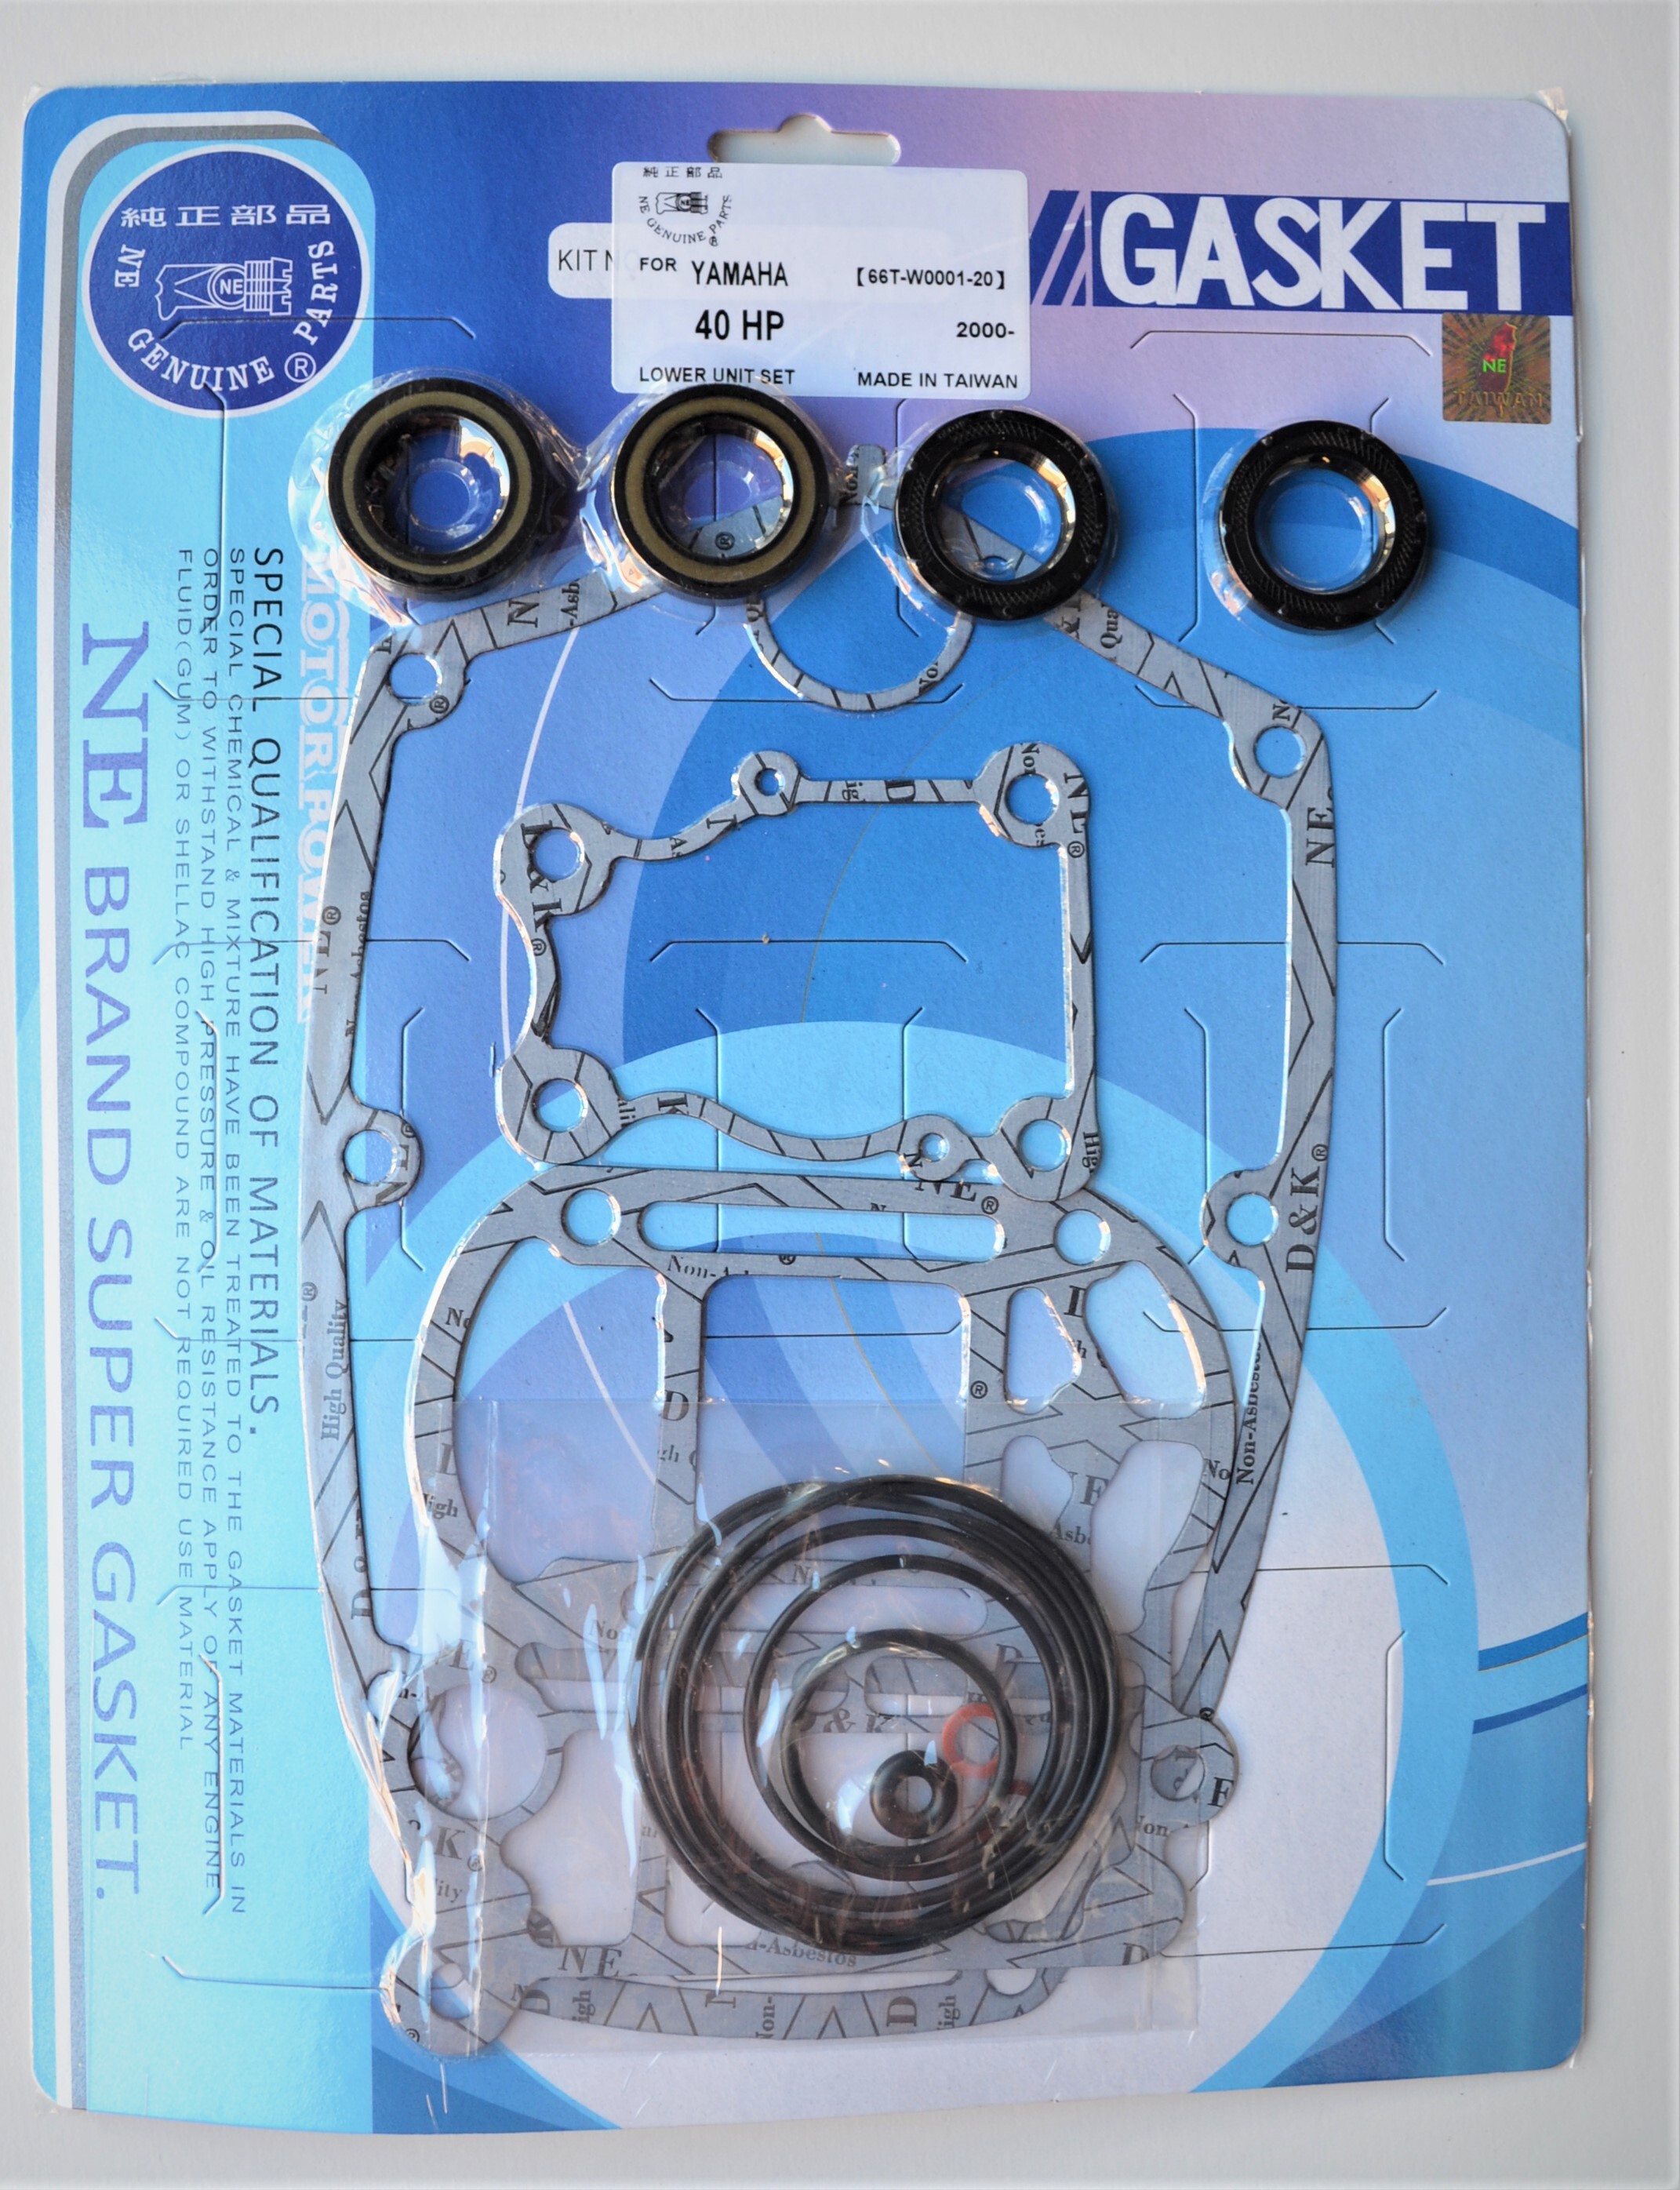 LOWER UNIT SEAL KIT FOR 40HP 2000 - FOR YAMAHA F40ESRY/MLHY/TLRY Outboard Motors # 66T-W0001-20